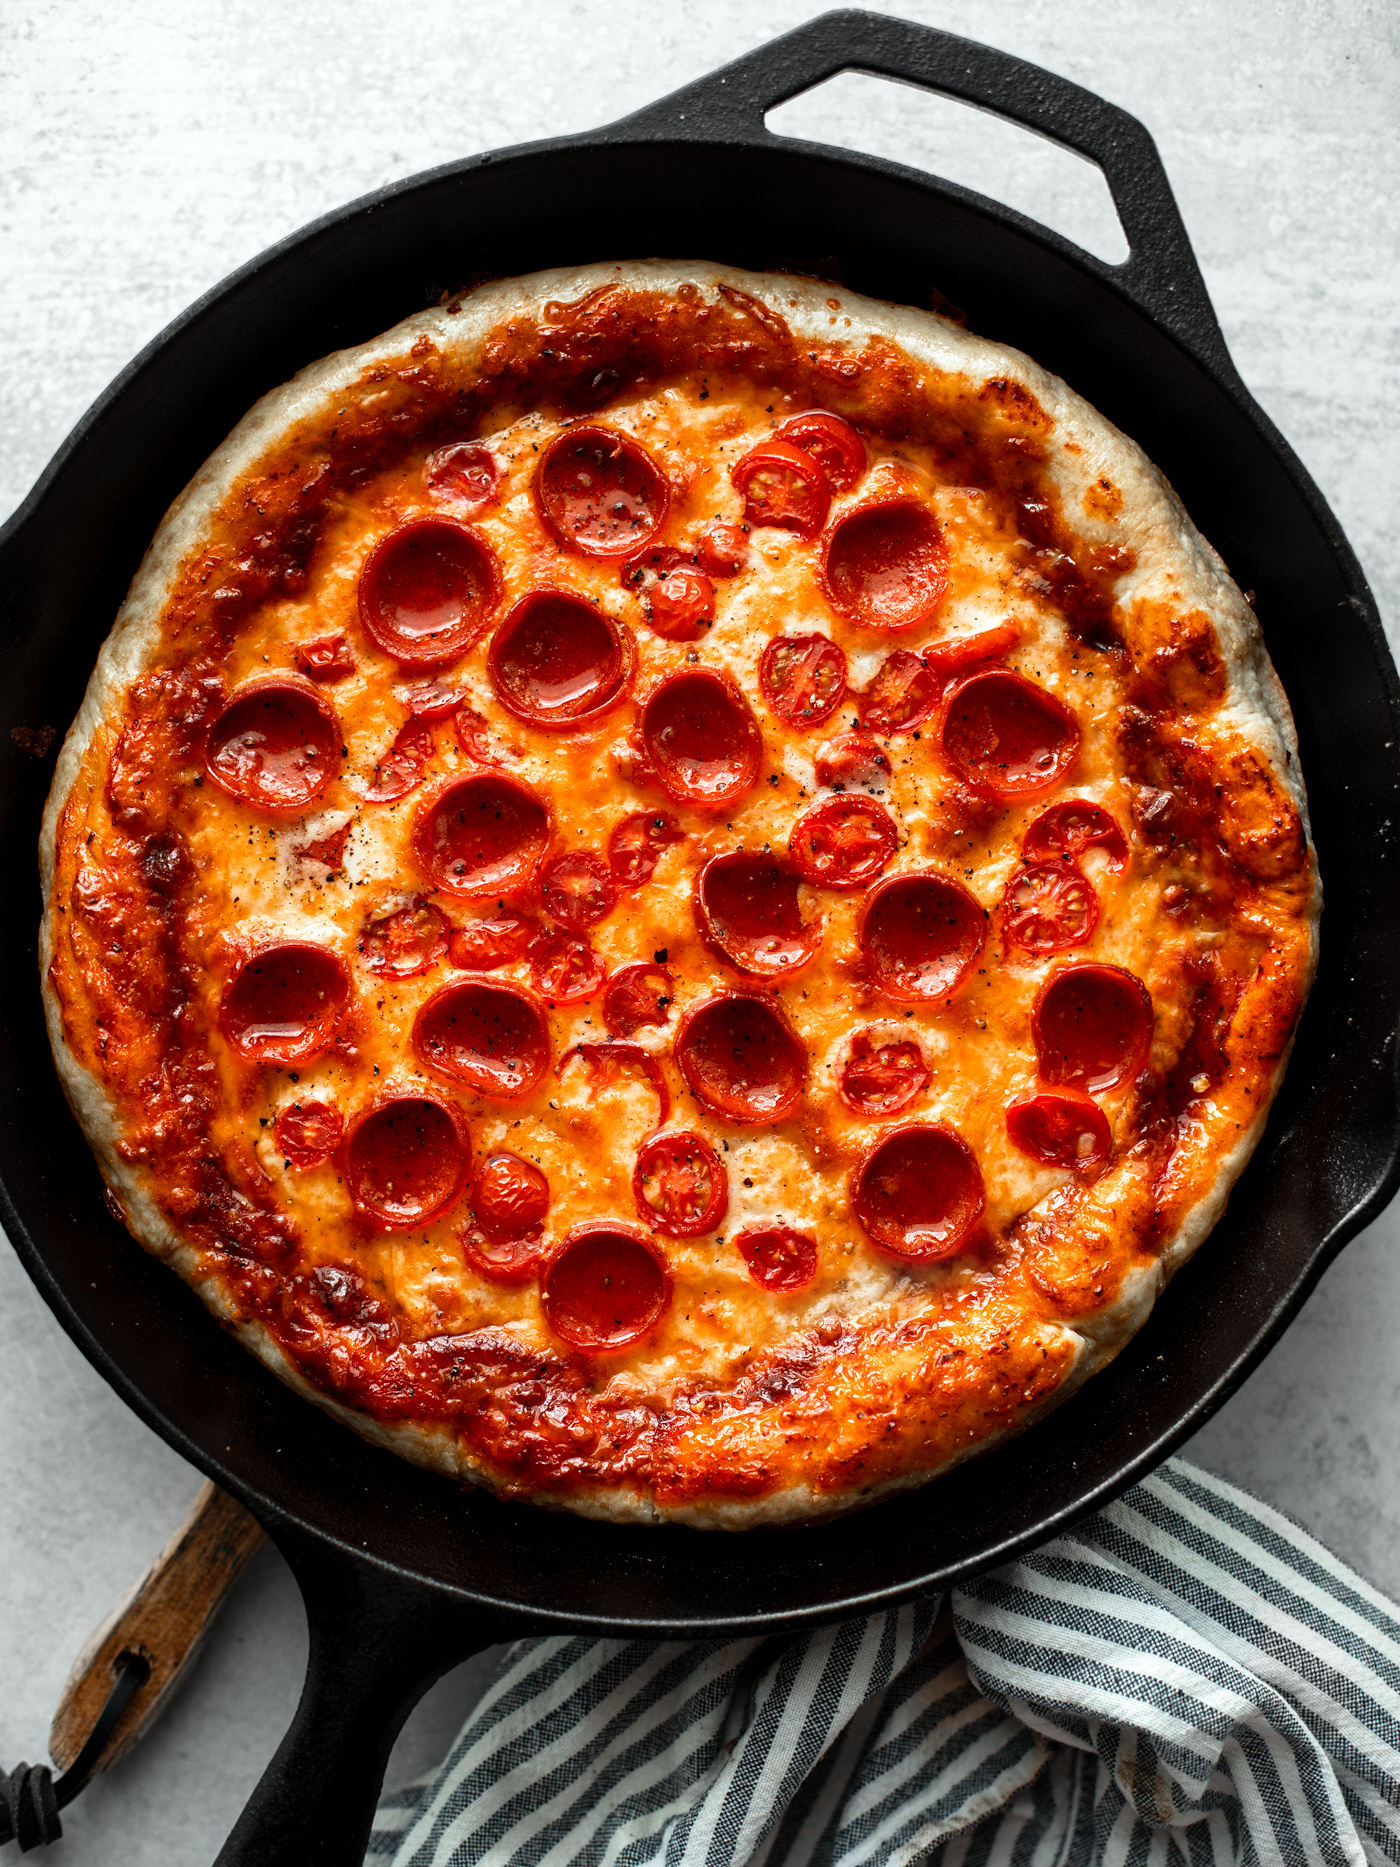 Cast iron pan with cheesy pepperoni pizza in it.